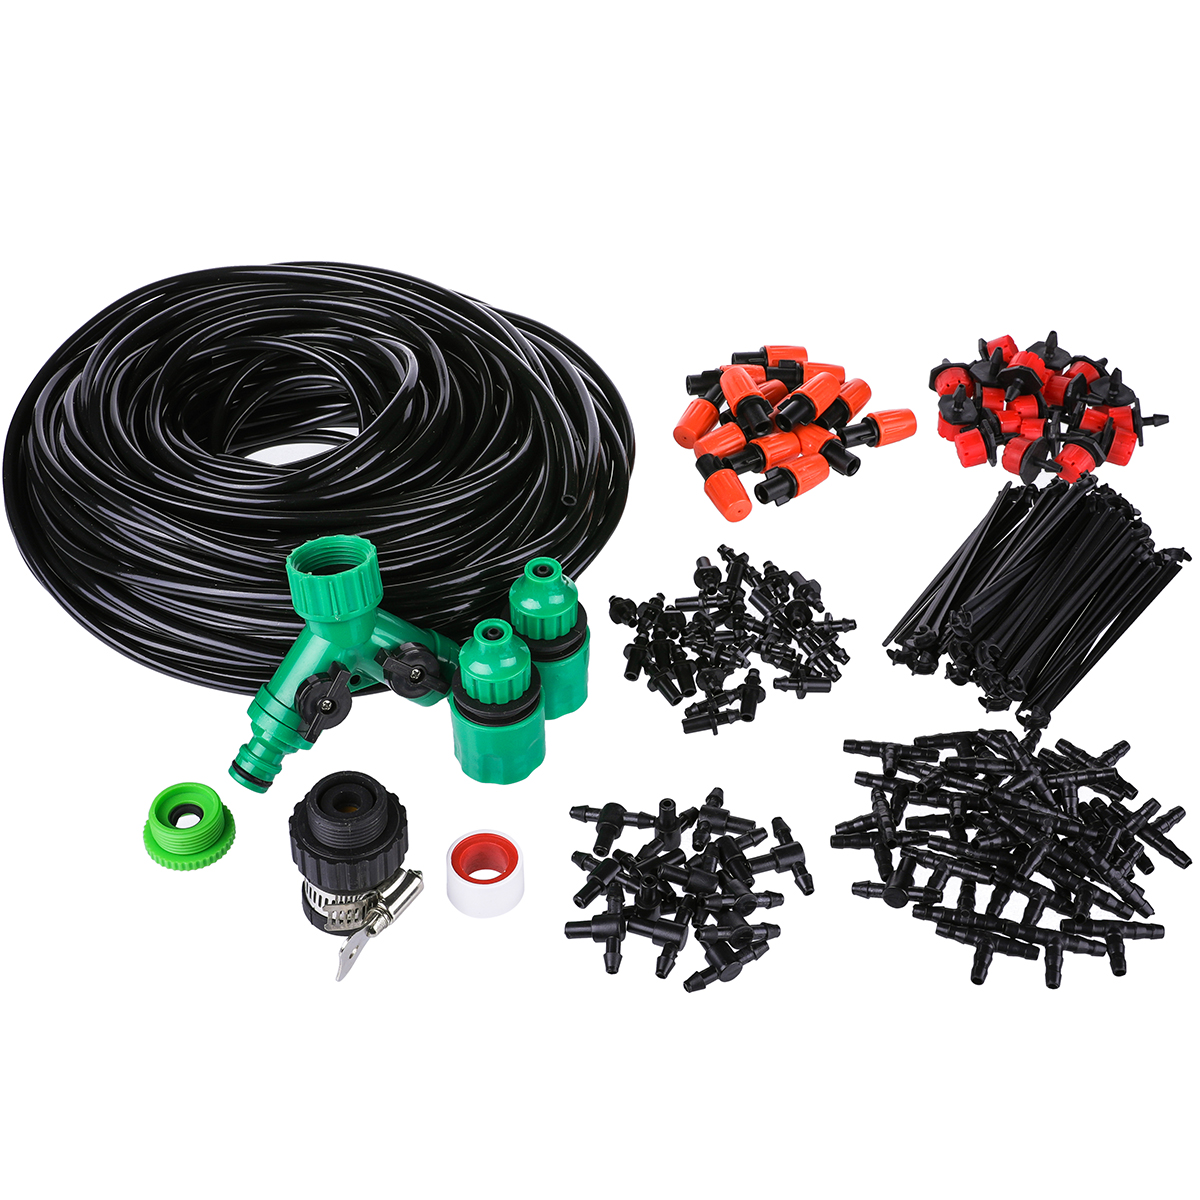 OUTERDO-40M-Mist-Cooling-Irrigation-System-Micro-Drip-Irrigation-Kit-Garden-Patio-Plant-Watering-Kit-1537233-9